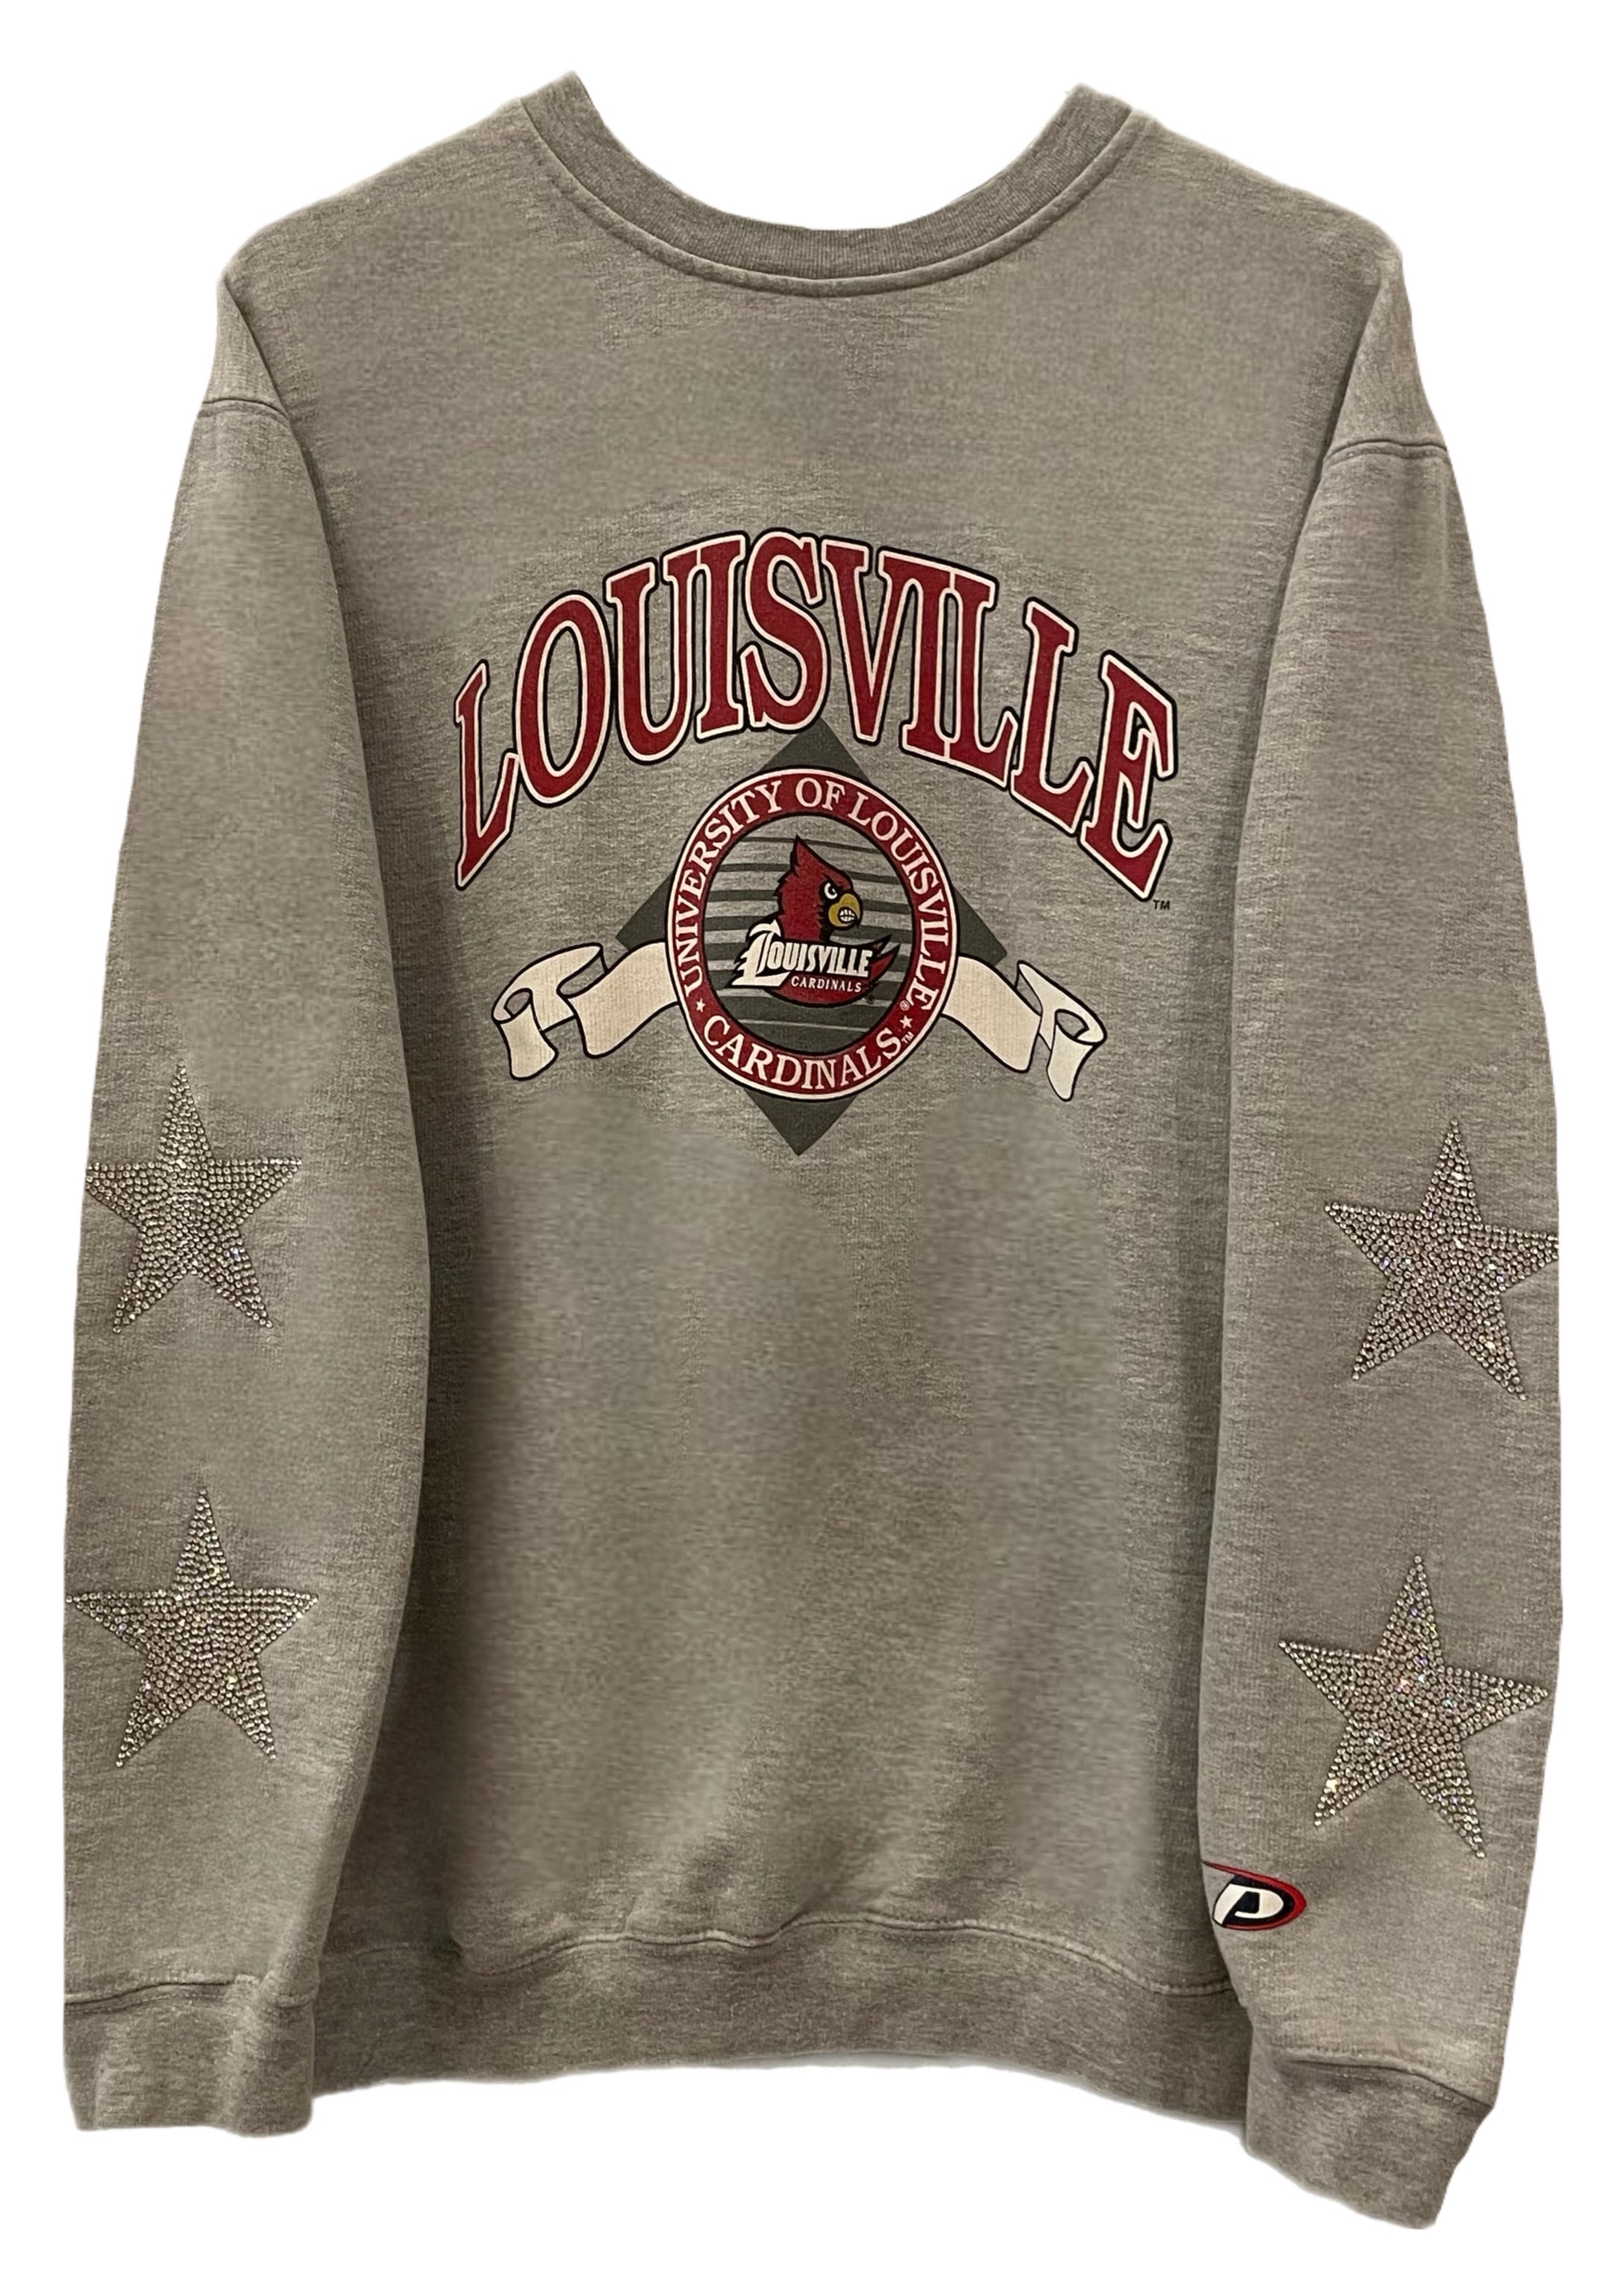 University of Louisville, Cardinals, One of a KIND Vintage